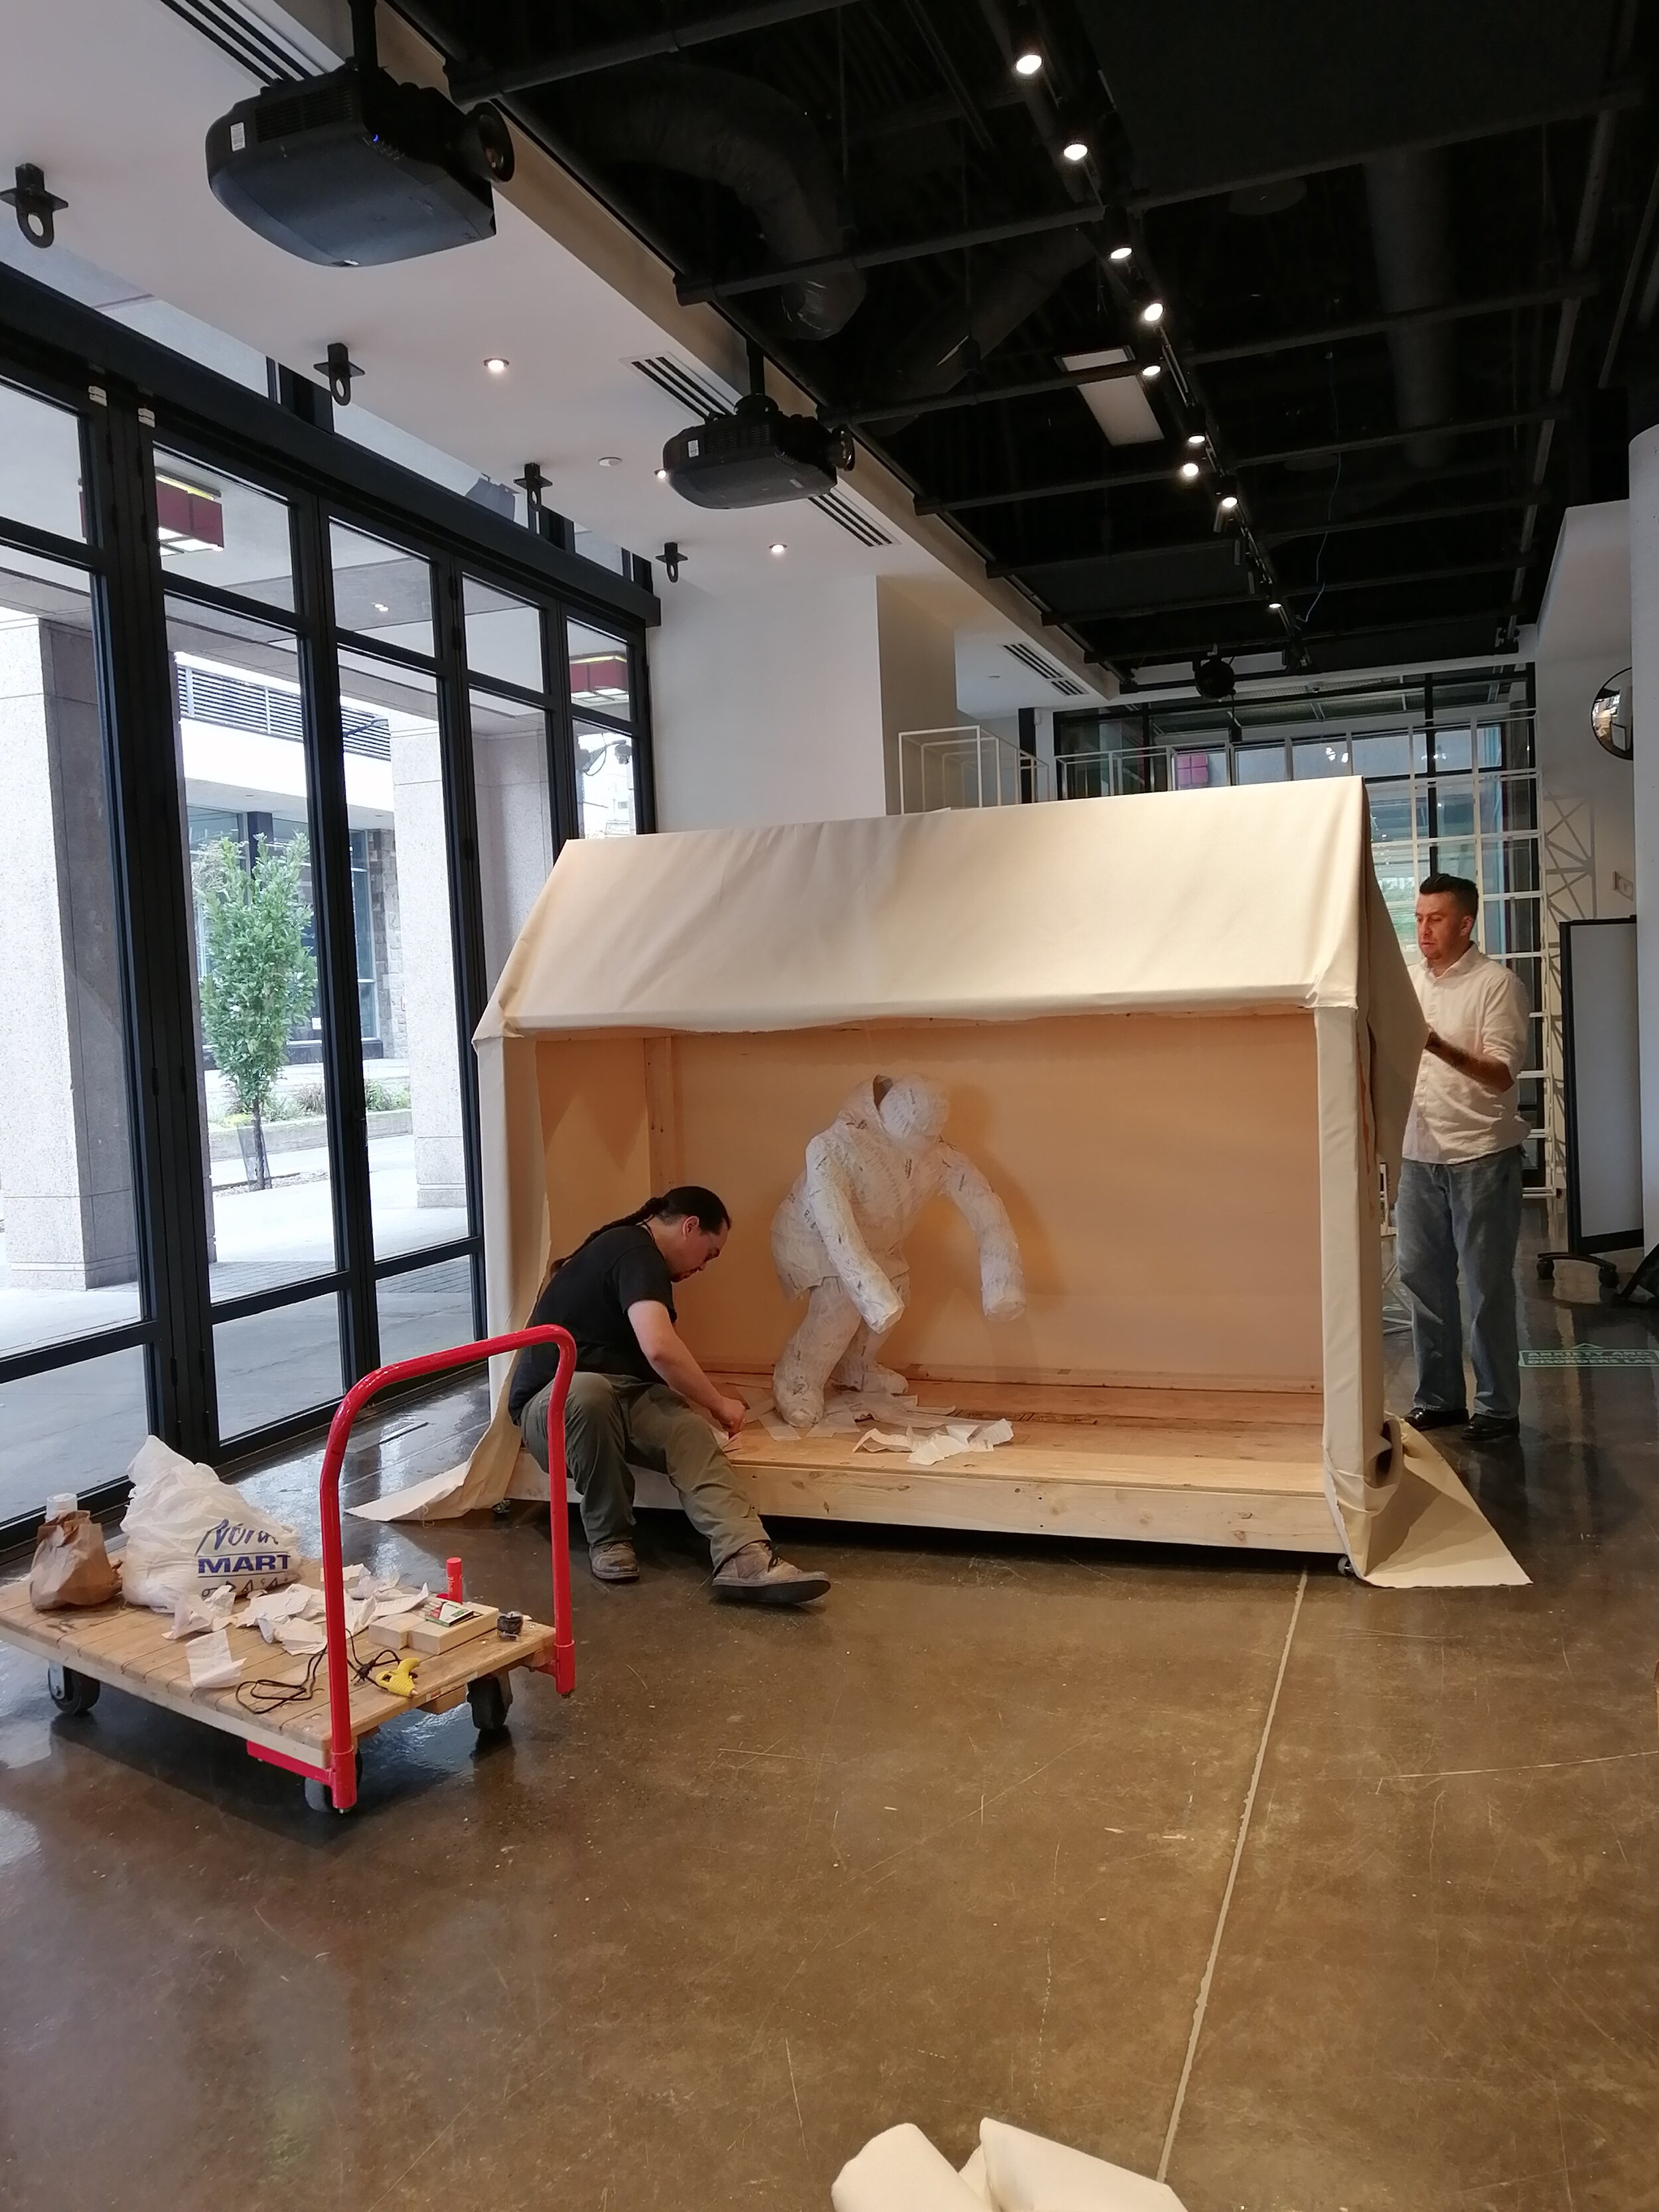  Jason Sikoak and Jesse Tungilik installing  Labrador Tent &nbsp;(2019) and&nbsp; Feeding My Family  (2019) for  Memory Keepers I  at Concorida’s 4th Space, Montreal QC. October 2019. Photo by Danielle Aimée Miles. 